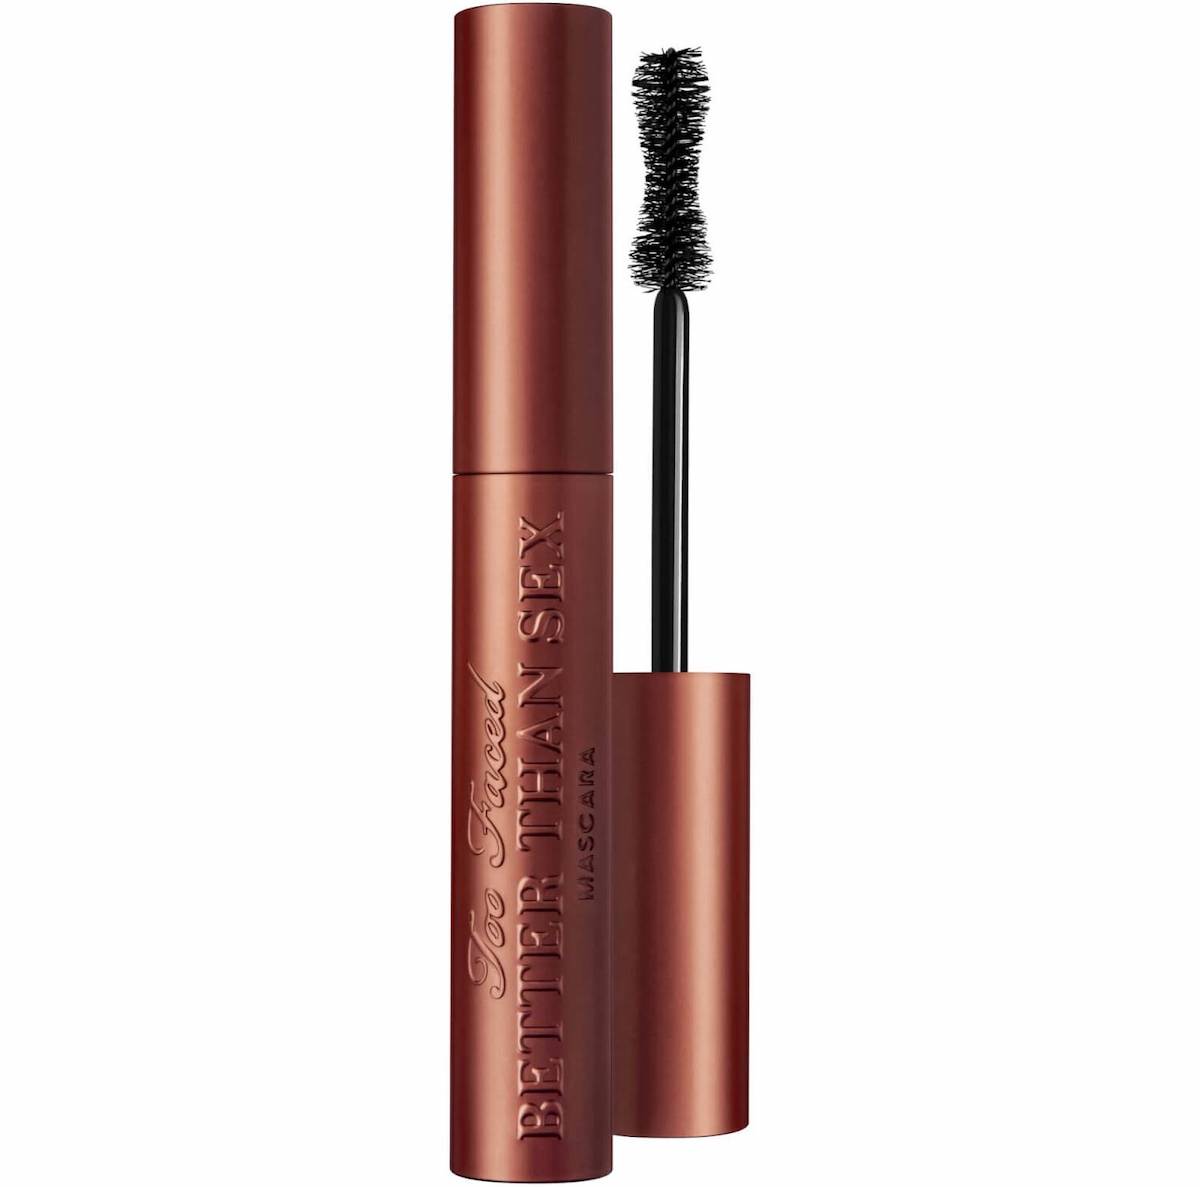 Brown mascara tube from Too Faced, Better Than Sex mascara in chocolate.